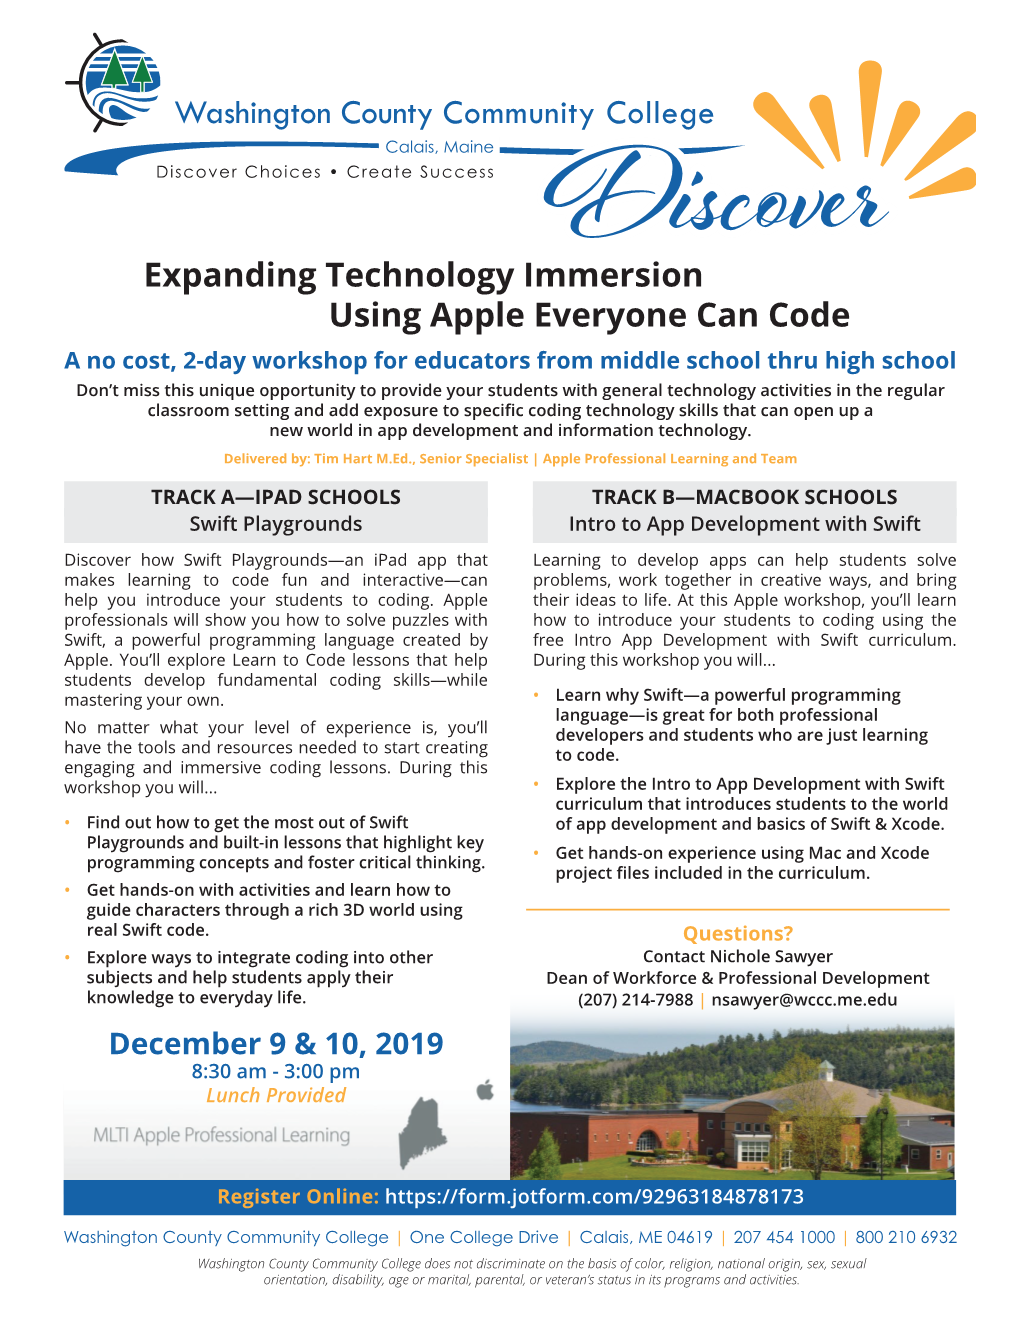 Expanding Technology Immersion Using Apple Everyone Can Code